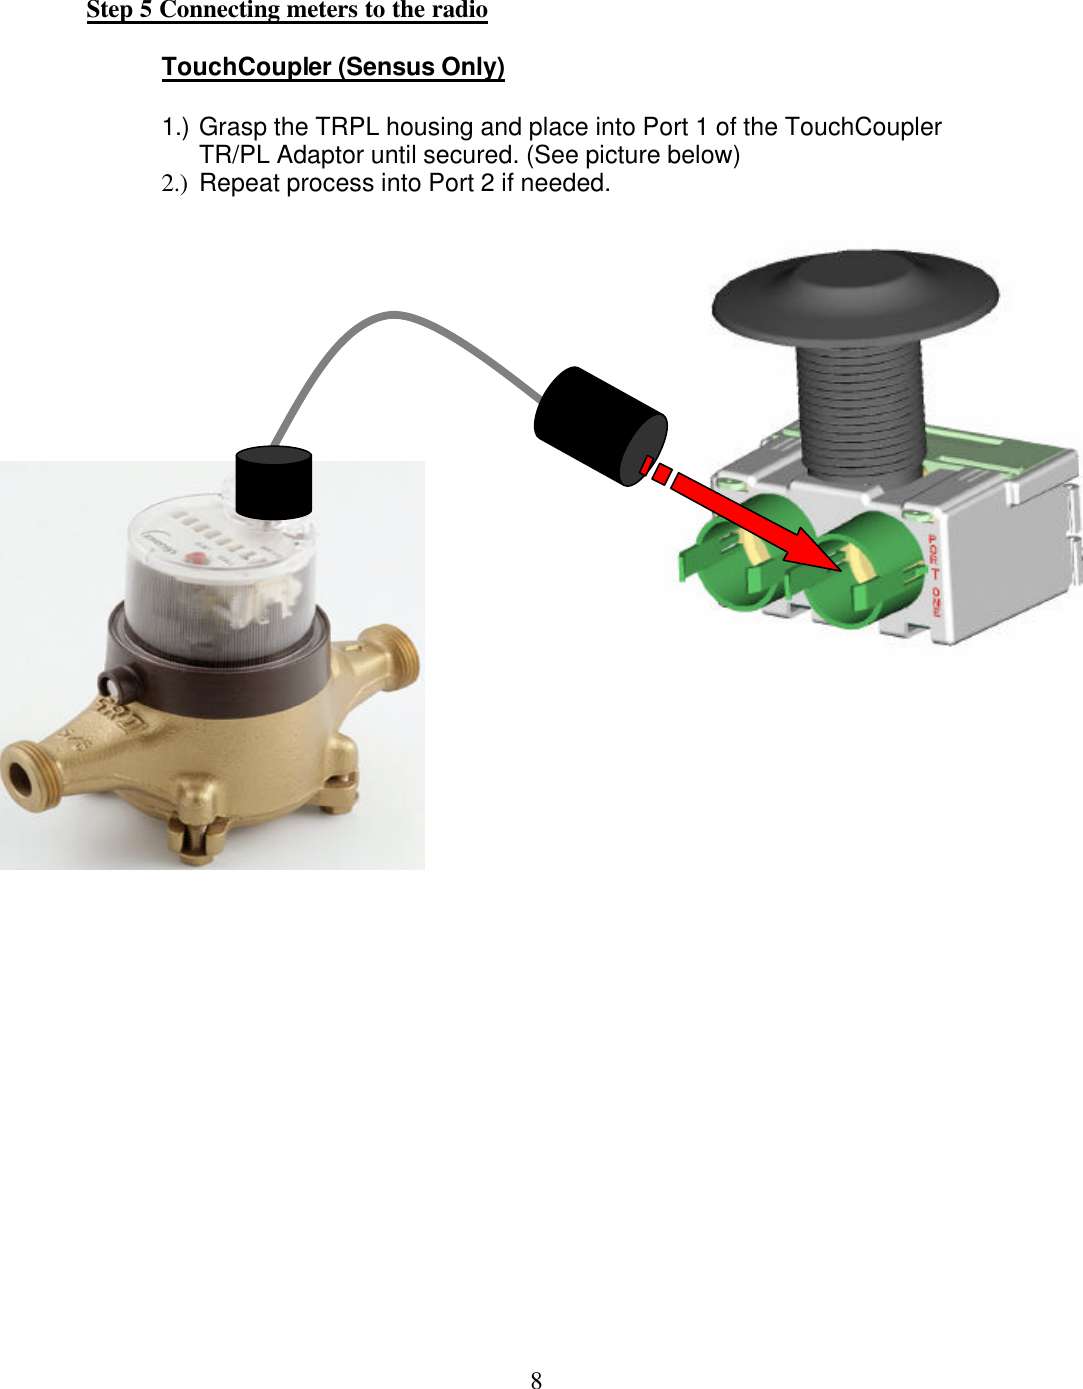  8Step 5 Connecting meters to the radio   TouchCoupler (Sensus Only)  1.) Grasp the TRPL housing and place into Port 1 of the TouchCoupler TR/PL Adaptor until secured. (See picture below) 2.) Repeat process into Port 2 if needed.              